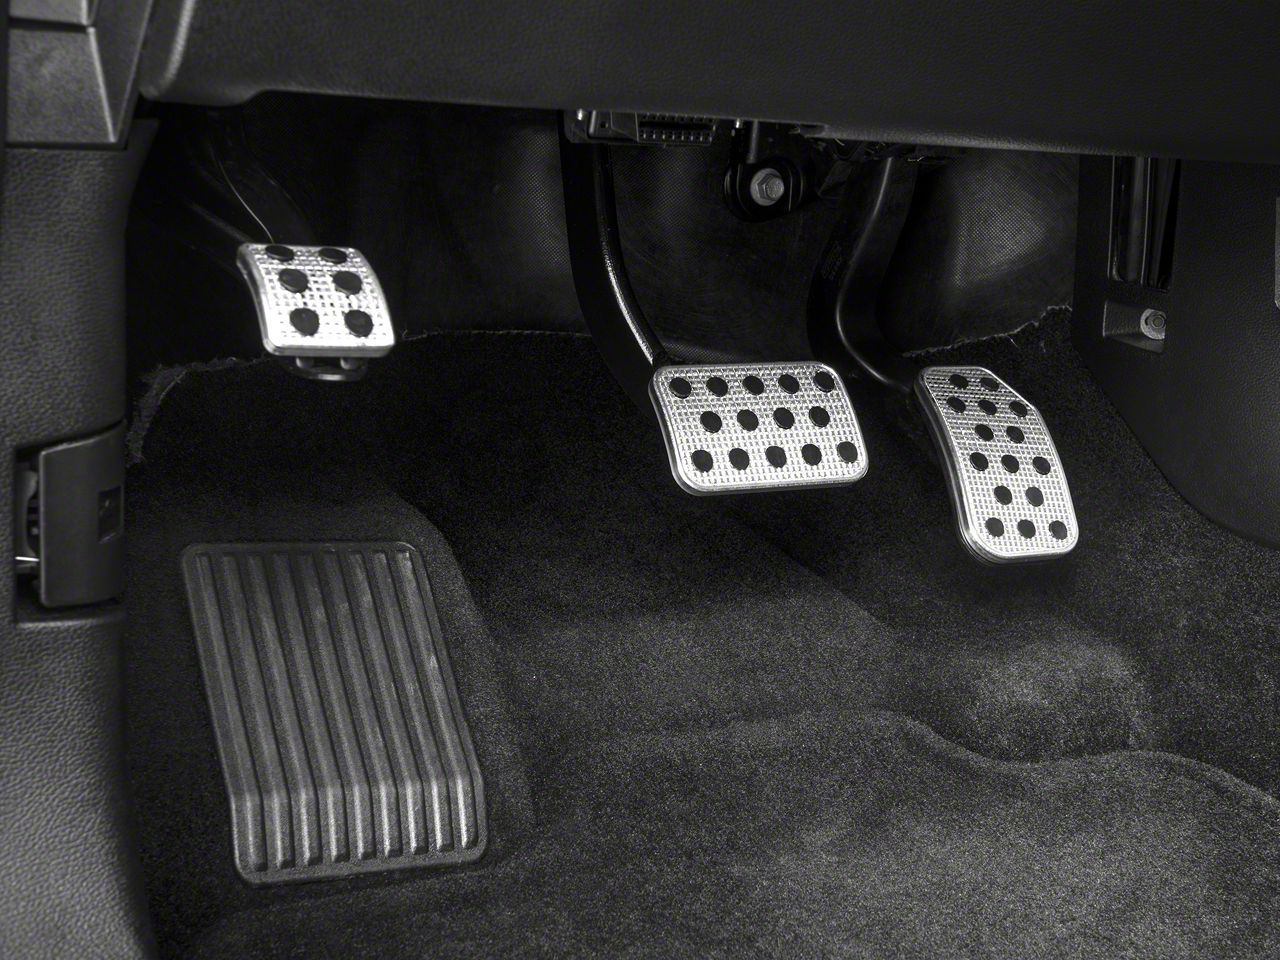 Ram 1500 Pedals & Pedal Covers 2009-2018